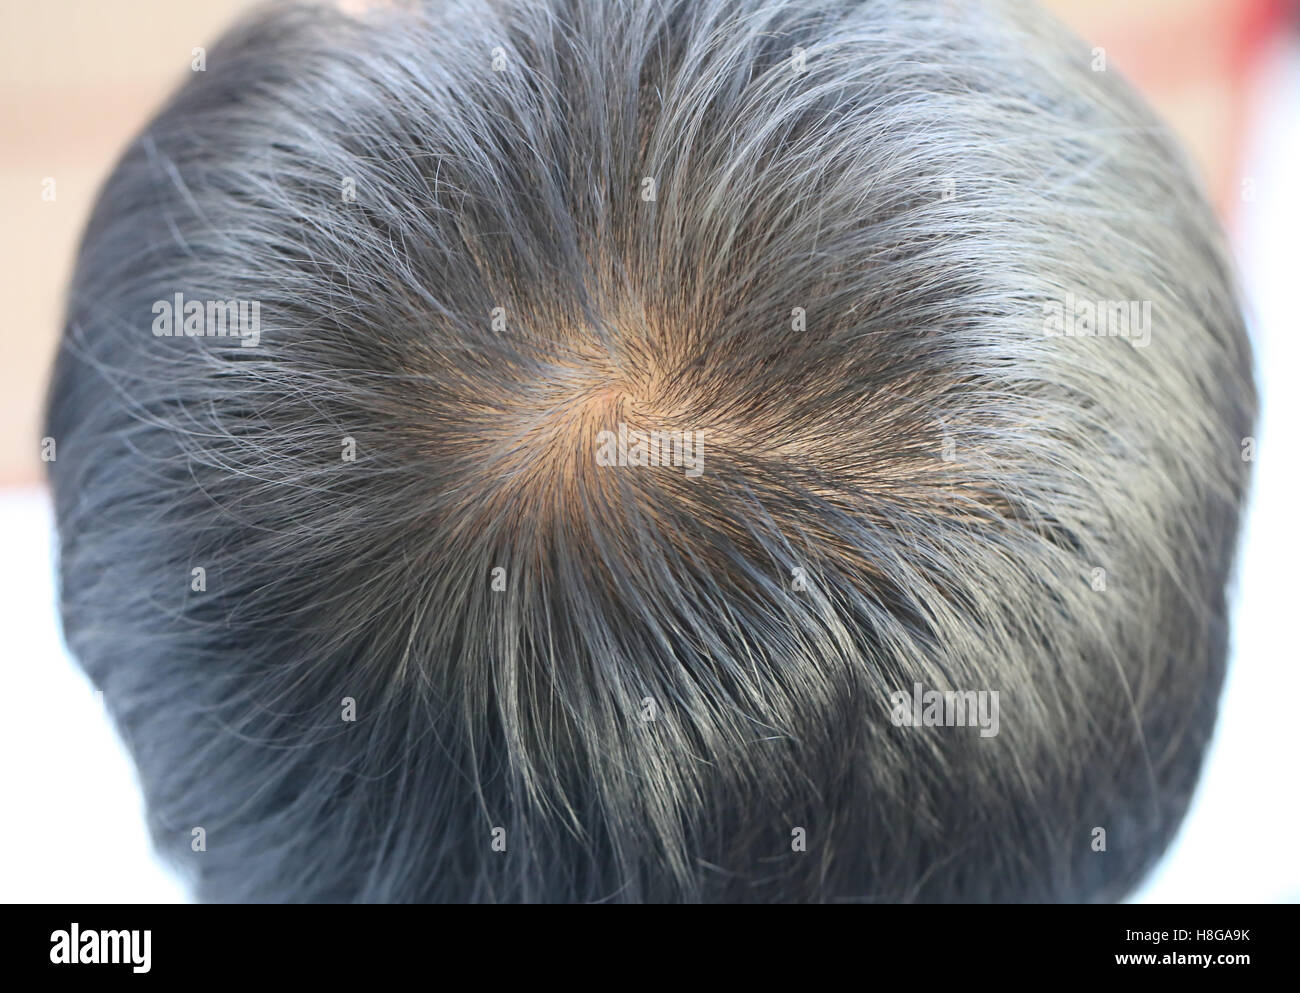 Focus on lose one's hair of a man,concept of health and beauty. Stock Photo